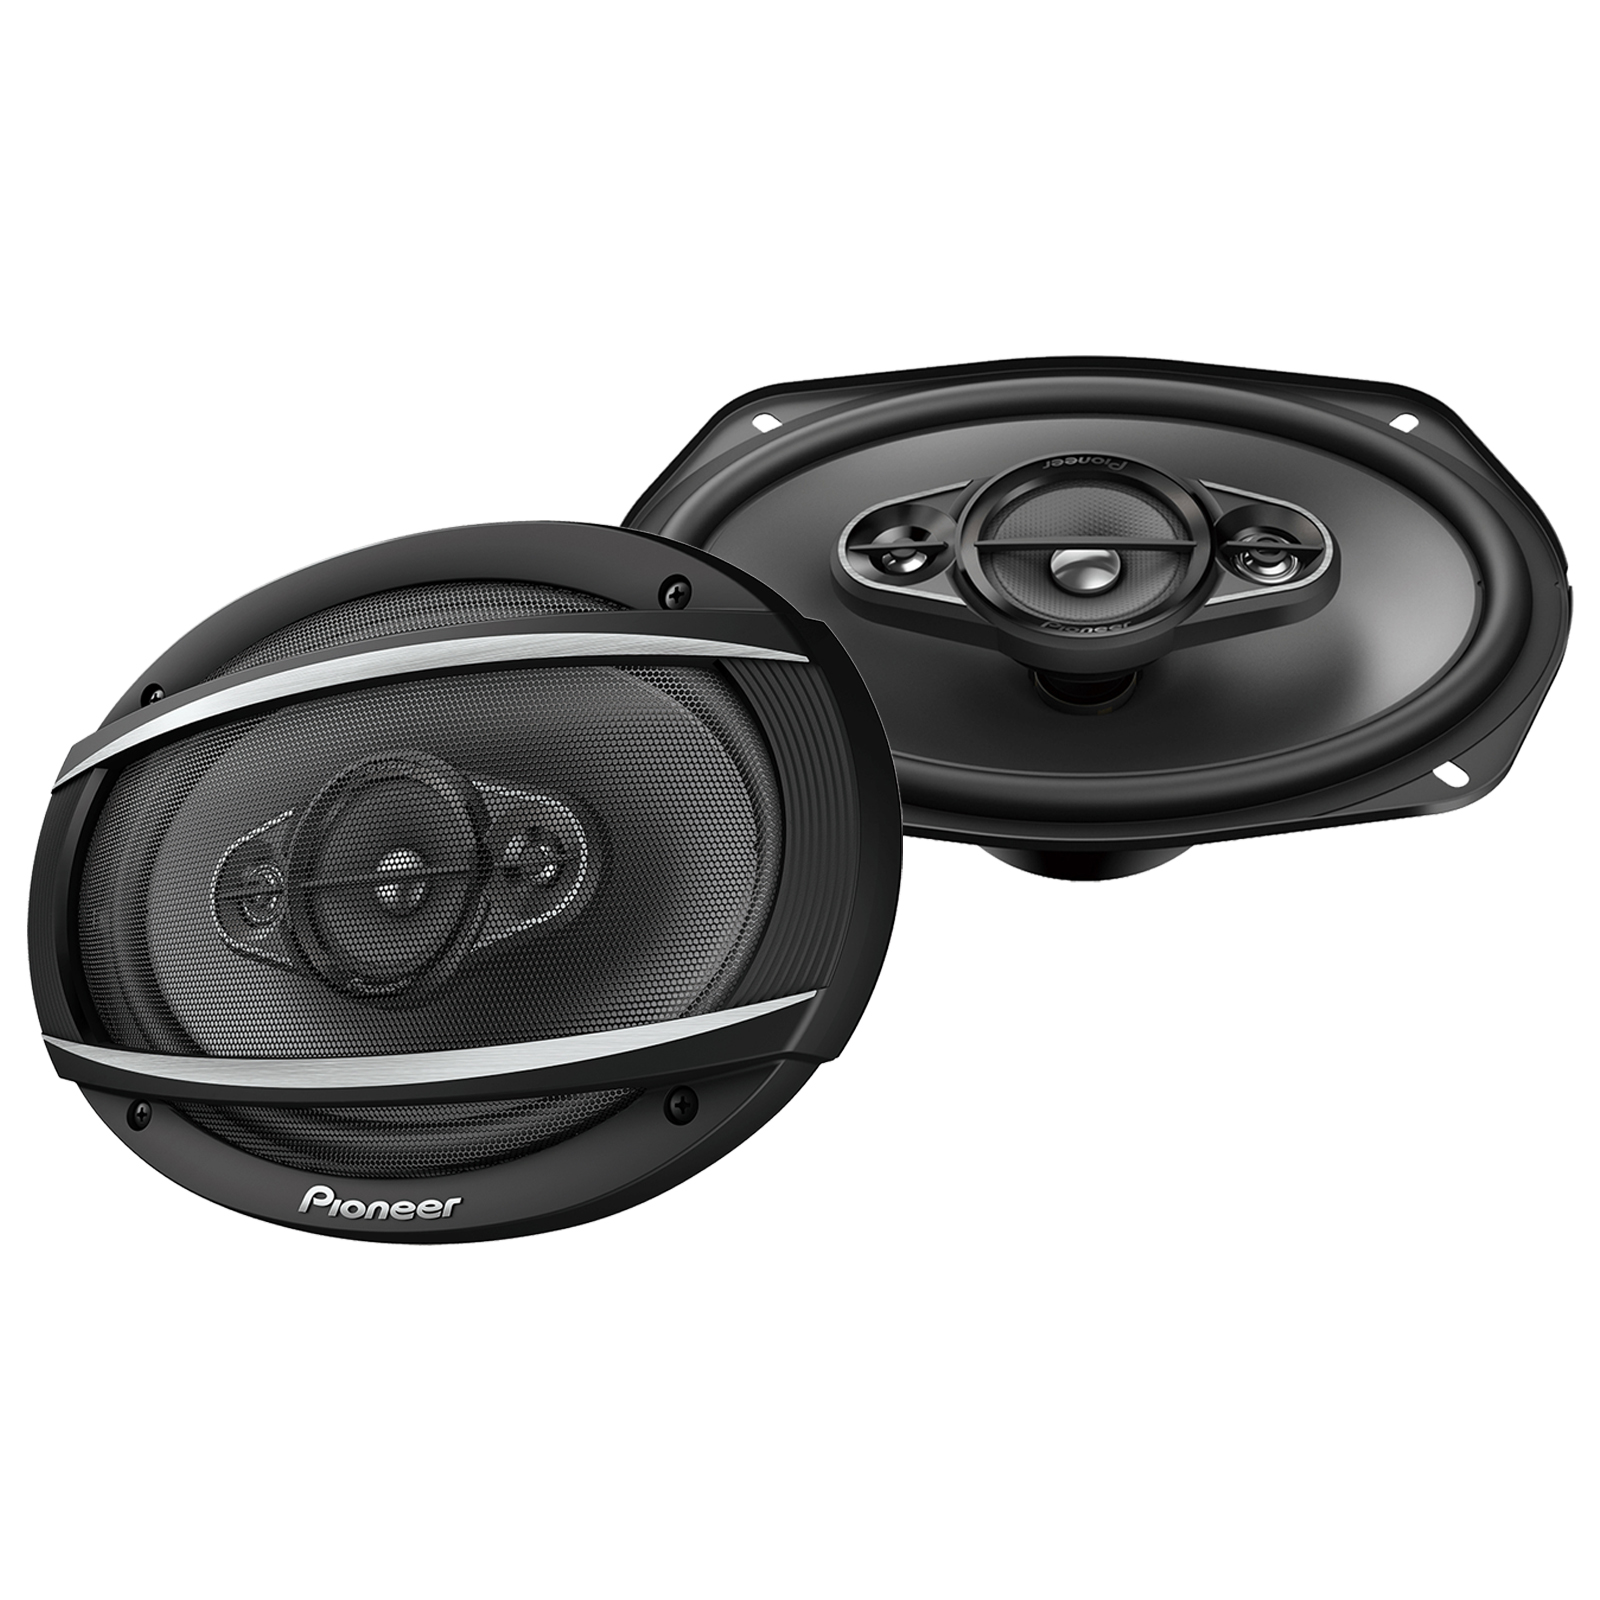 Pioneer TS-A6967S A-Series 6x9" shallow 4-Way 450 Watts Max Power Black Car Audio Speakers (Pair) - image 1 of 4